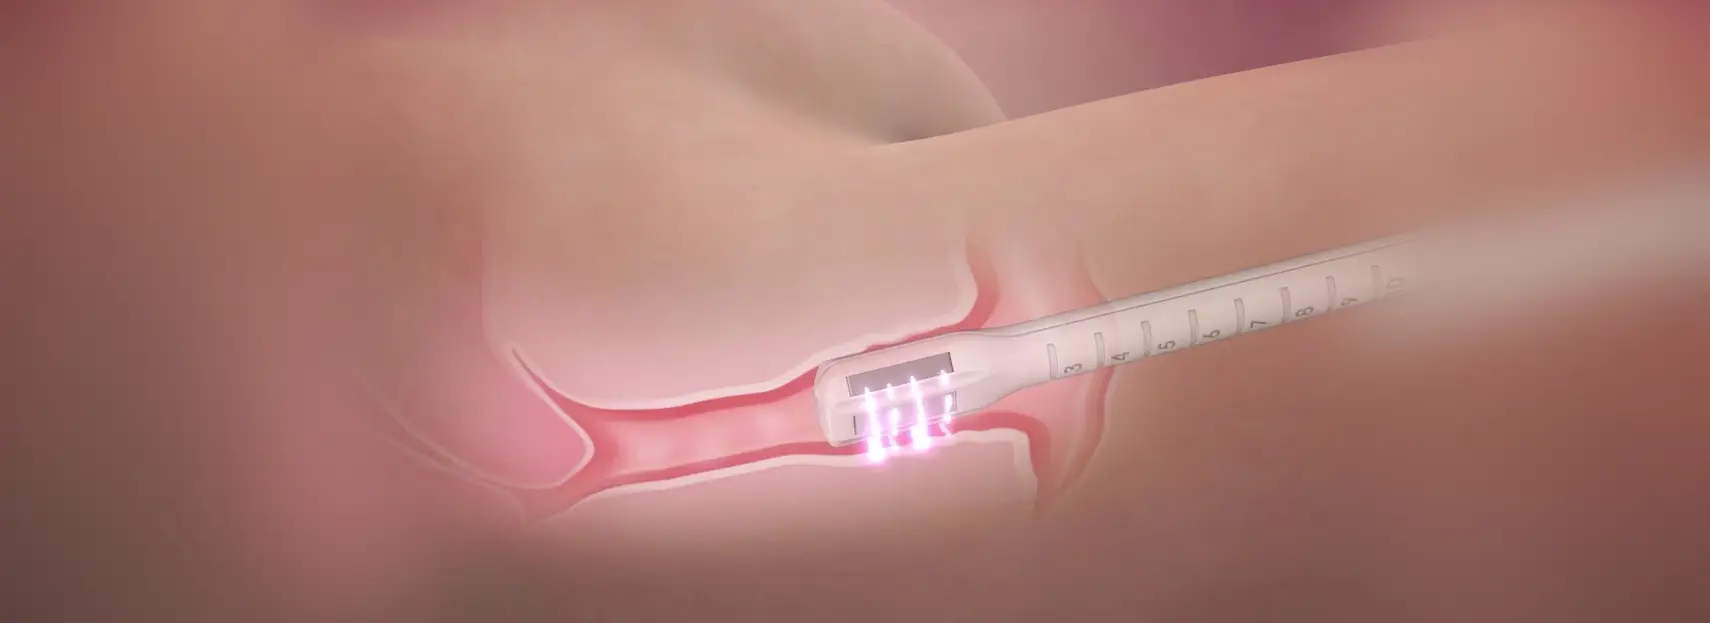 An illustration of a stent being placed in a blood vessel by a sexual health expert in Los Angeles to improve blood flow.